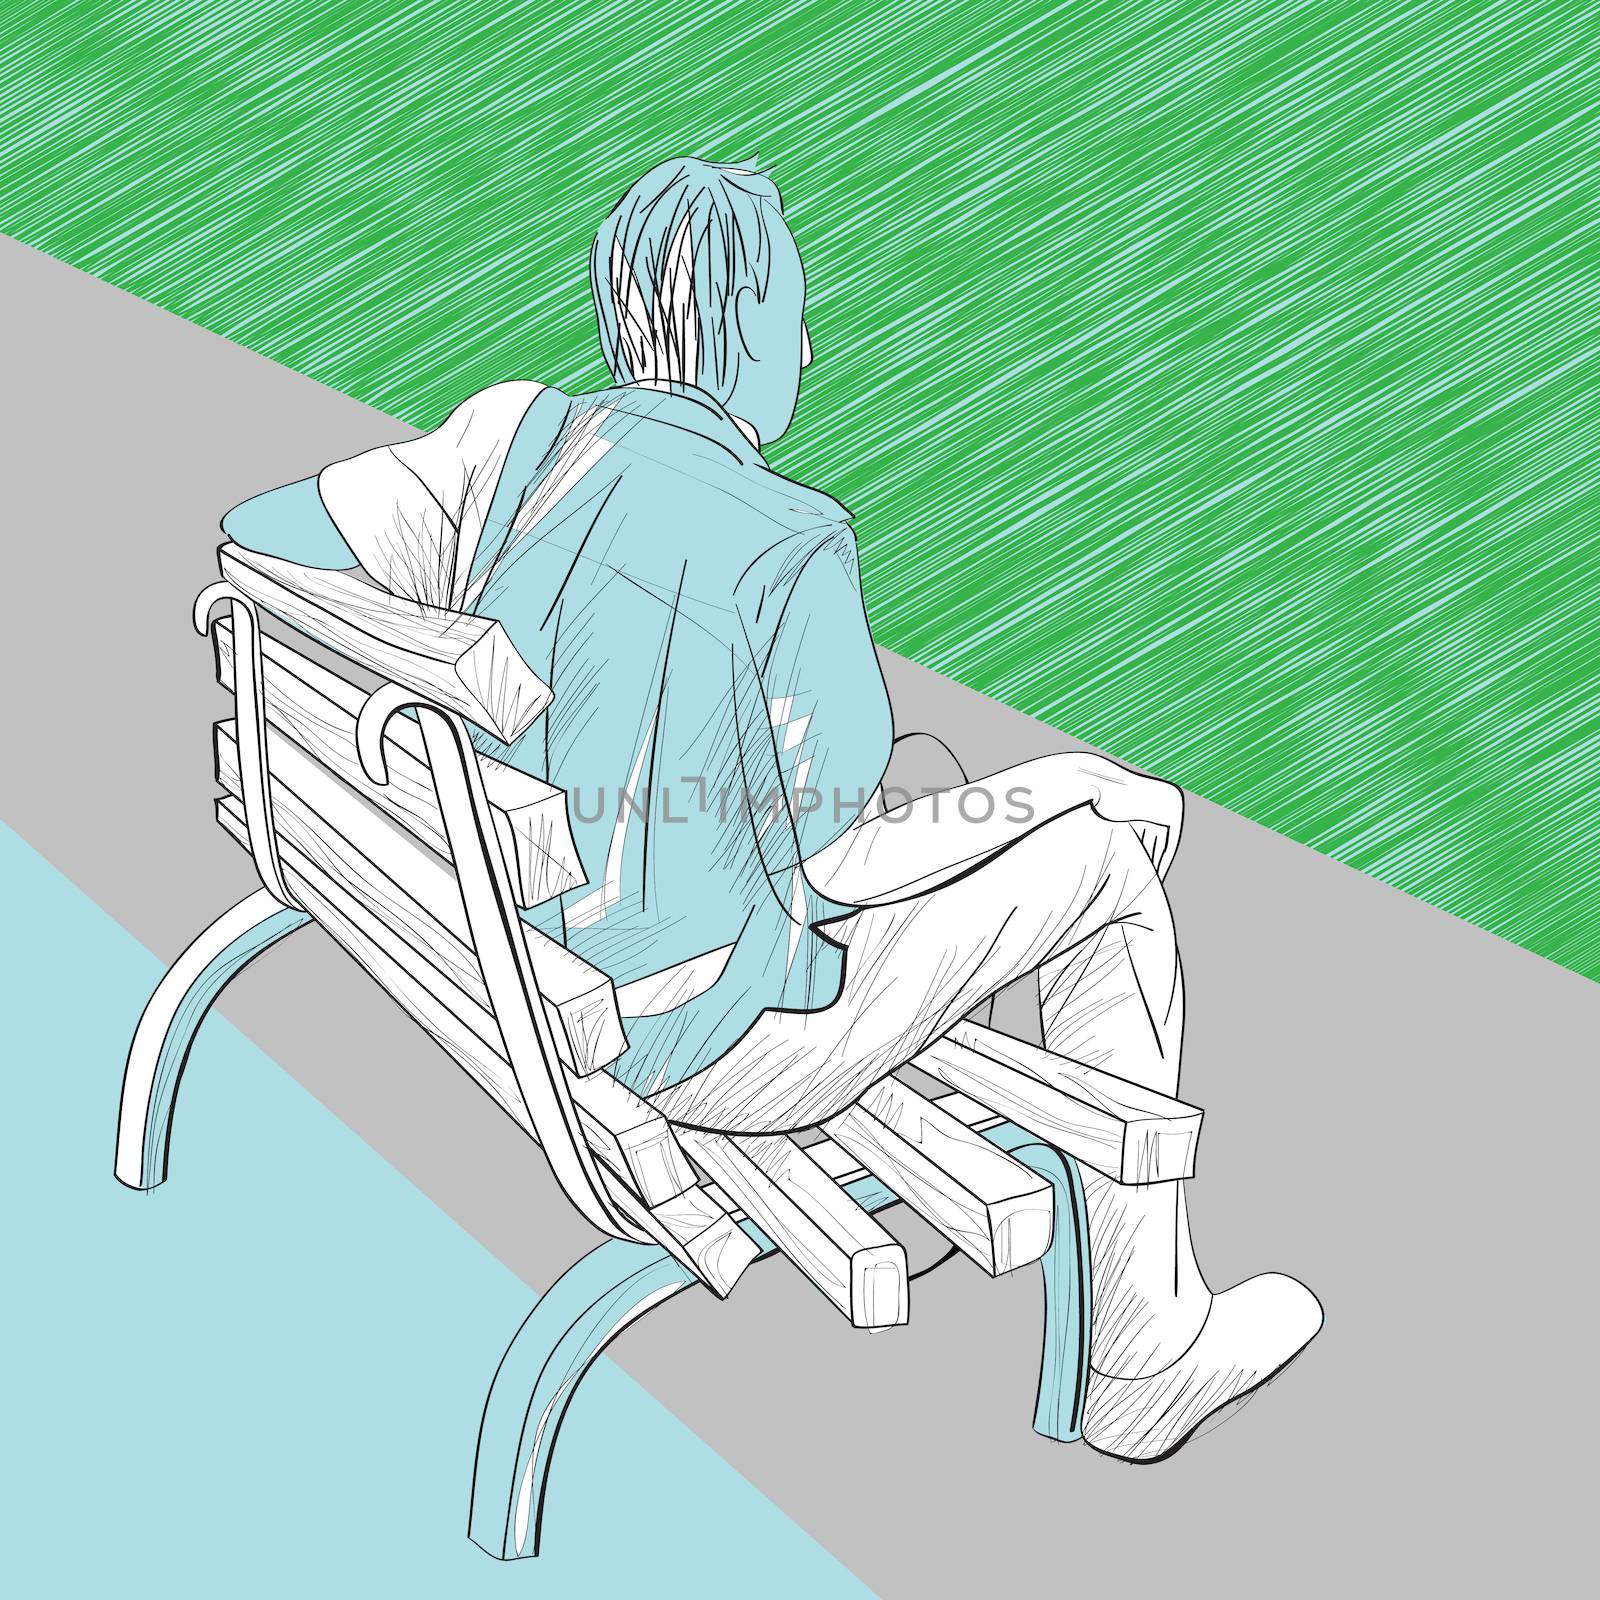 Hand drawn illustration of a men on a bench, artistic composition 